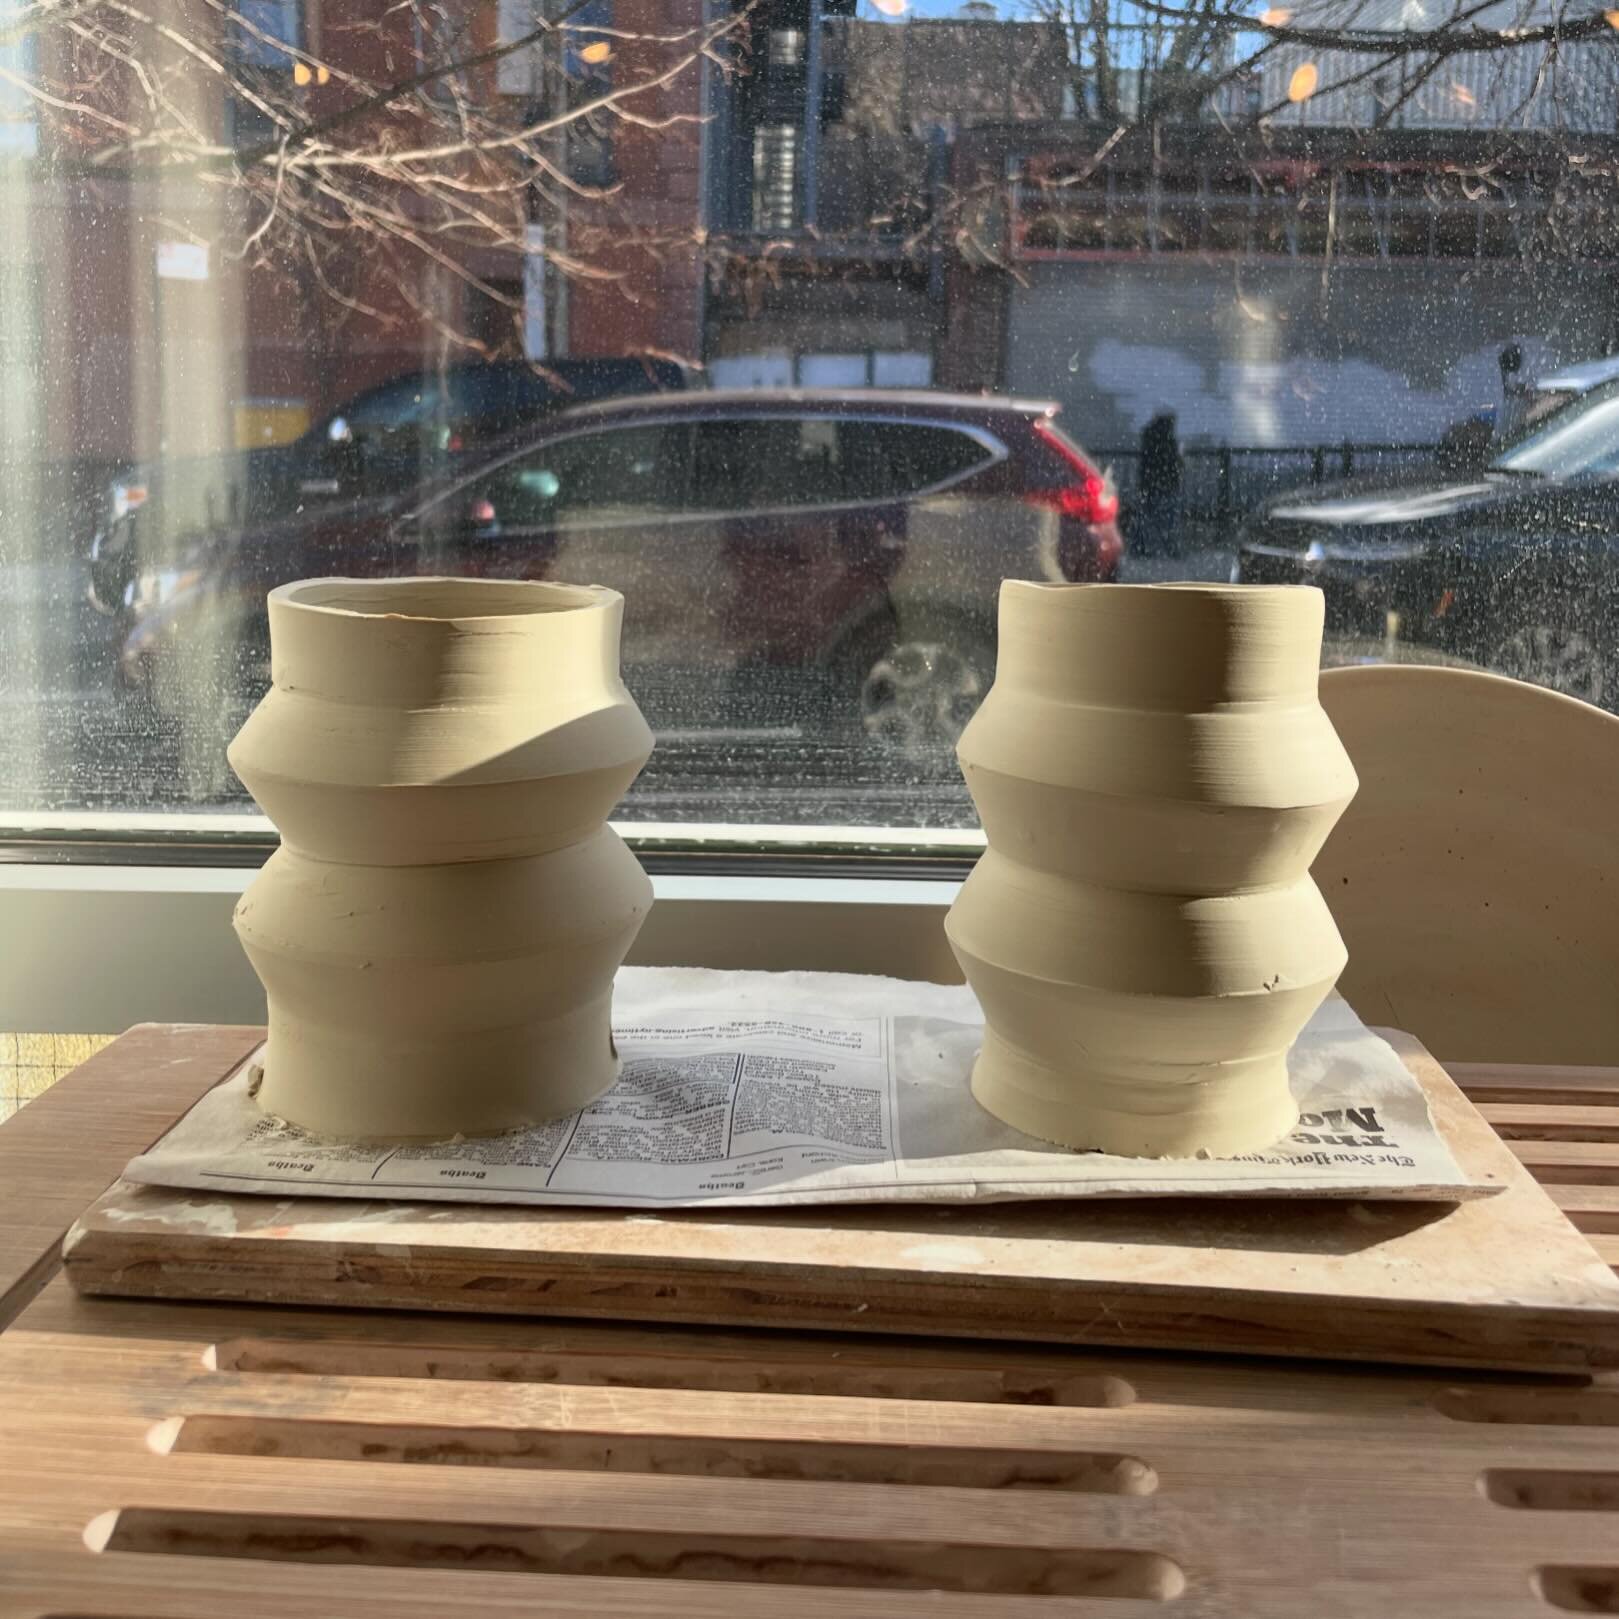 Throwing with Elian&rsquo;s Porcelain in preparation for a wood firing at @theokidokistudio in April.  I&rsquo;m accustomed to white and brown stone ware and having fun learning about the particularities of other clay bodies. You have to listen to th